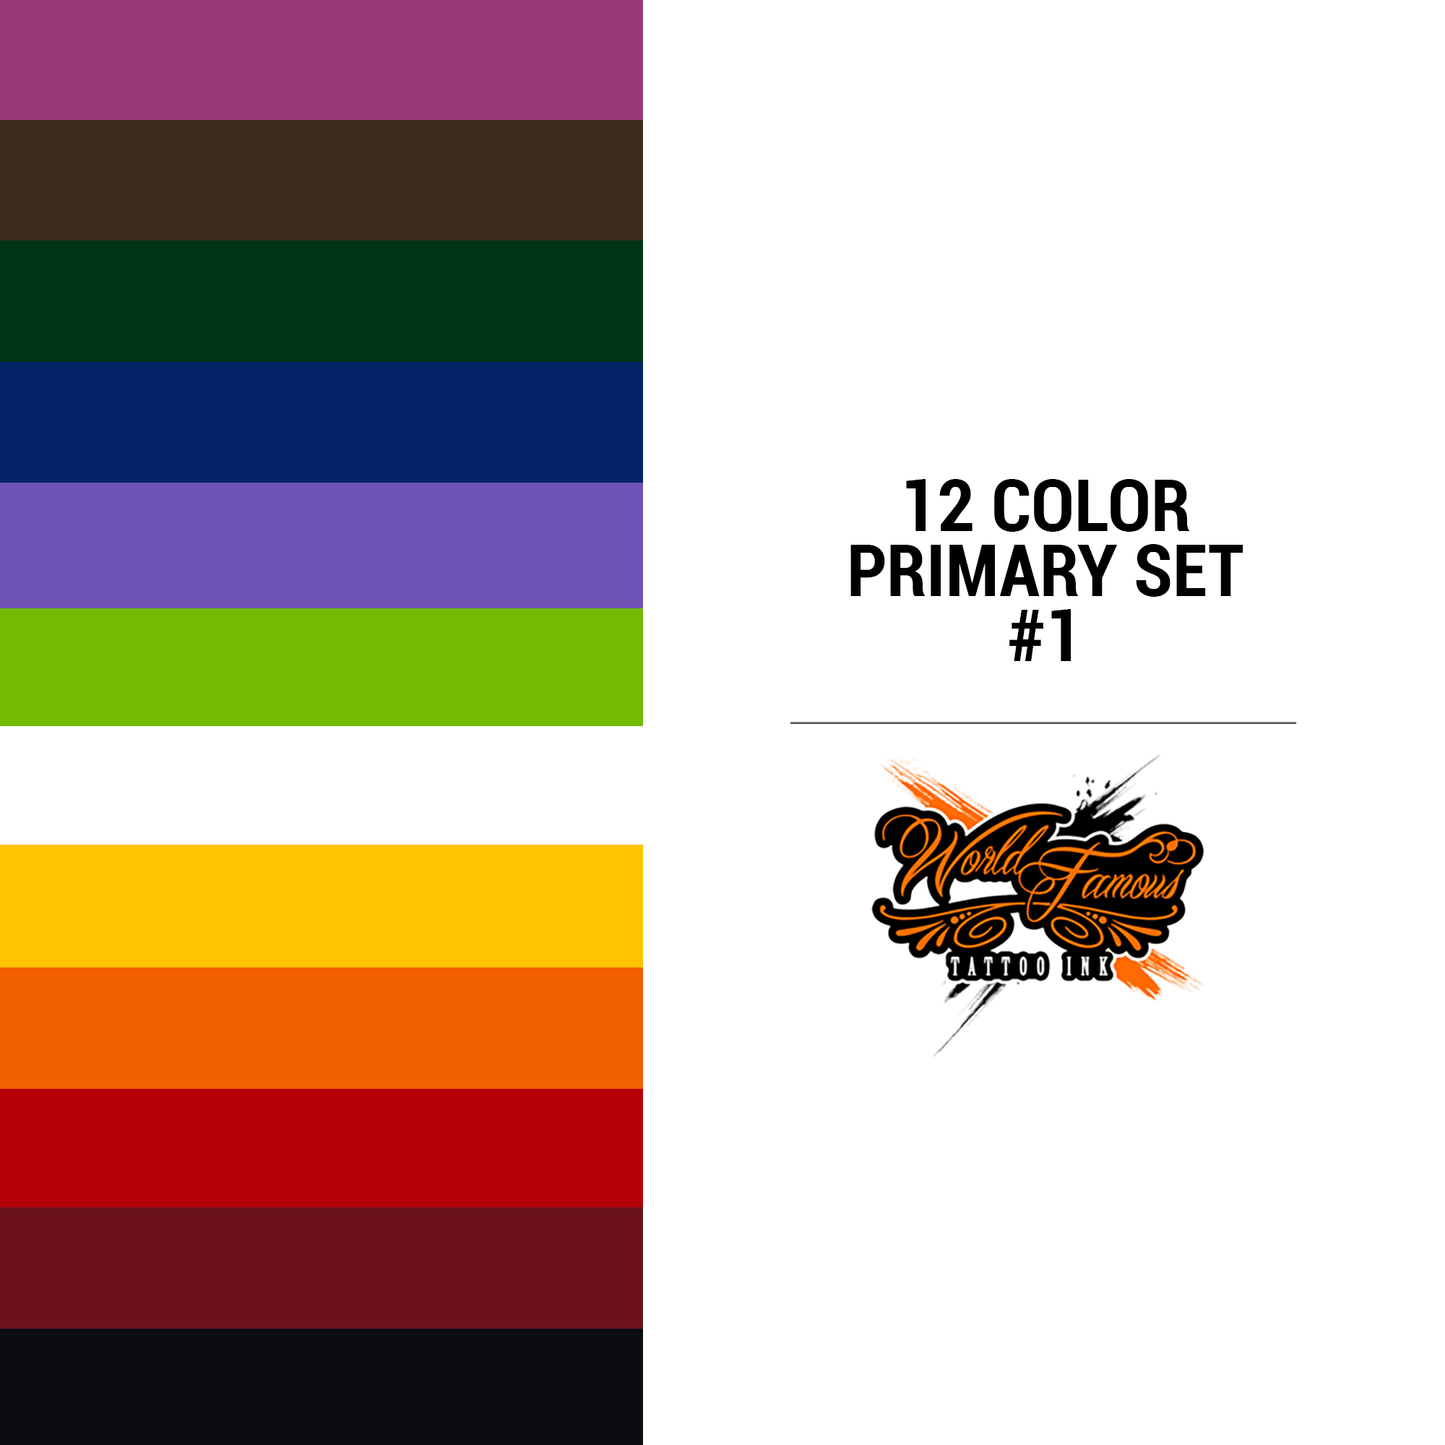 12 Color Primary Set #1 | World Famous Tattoo Ink